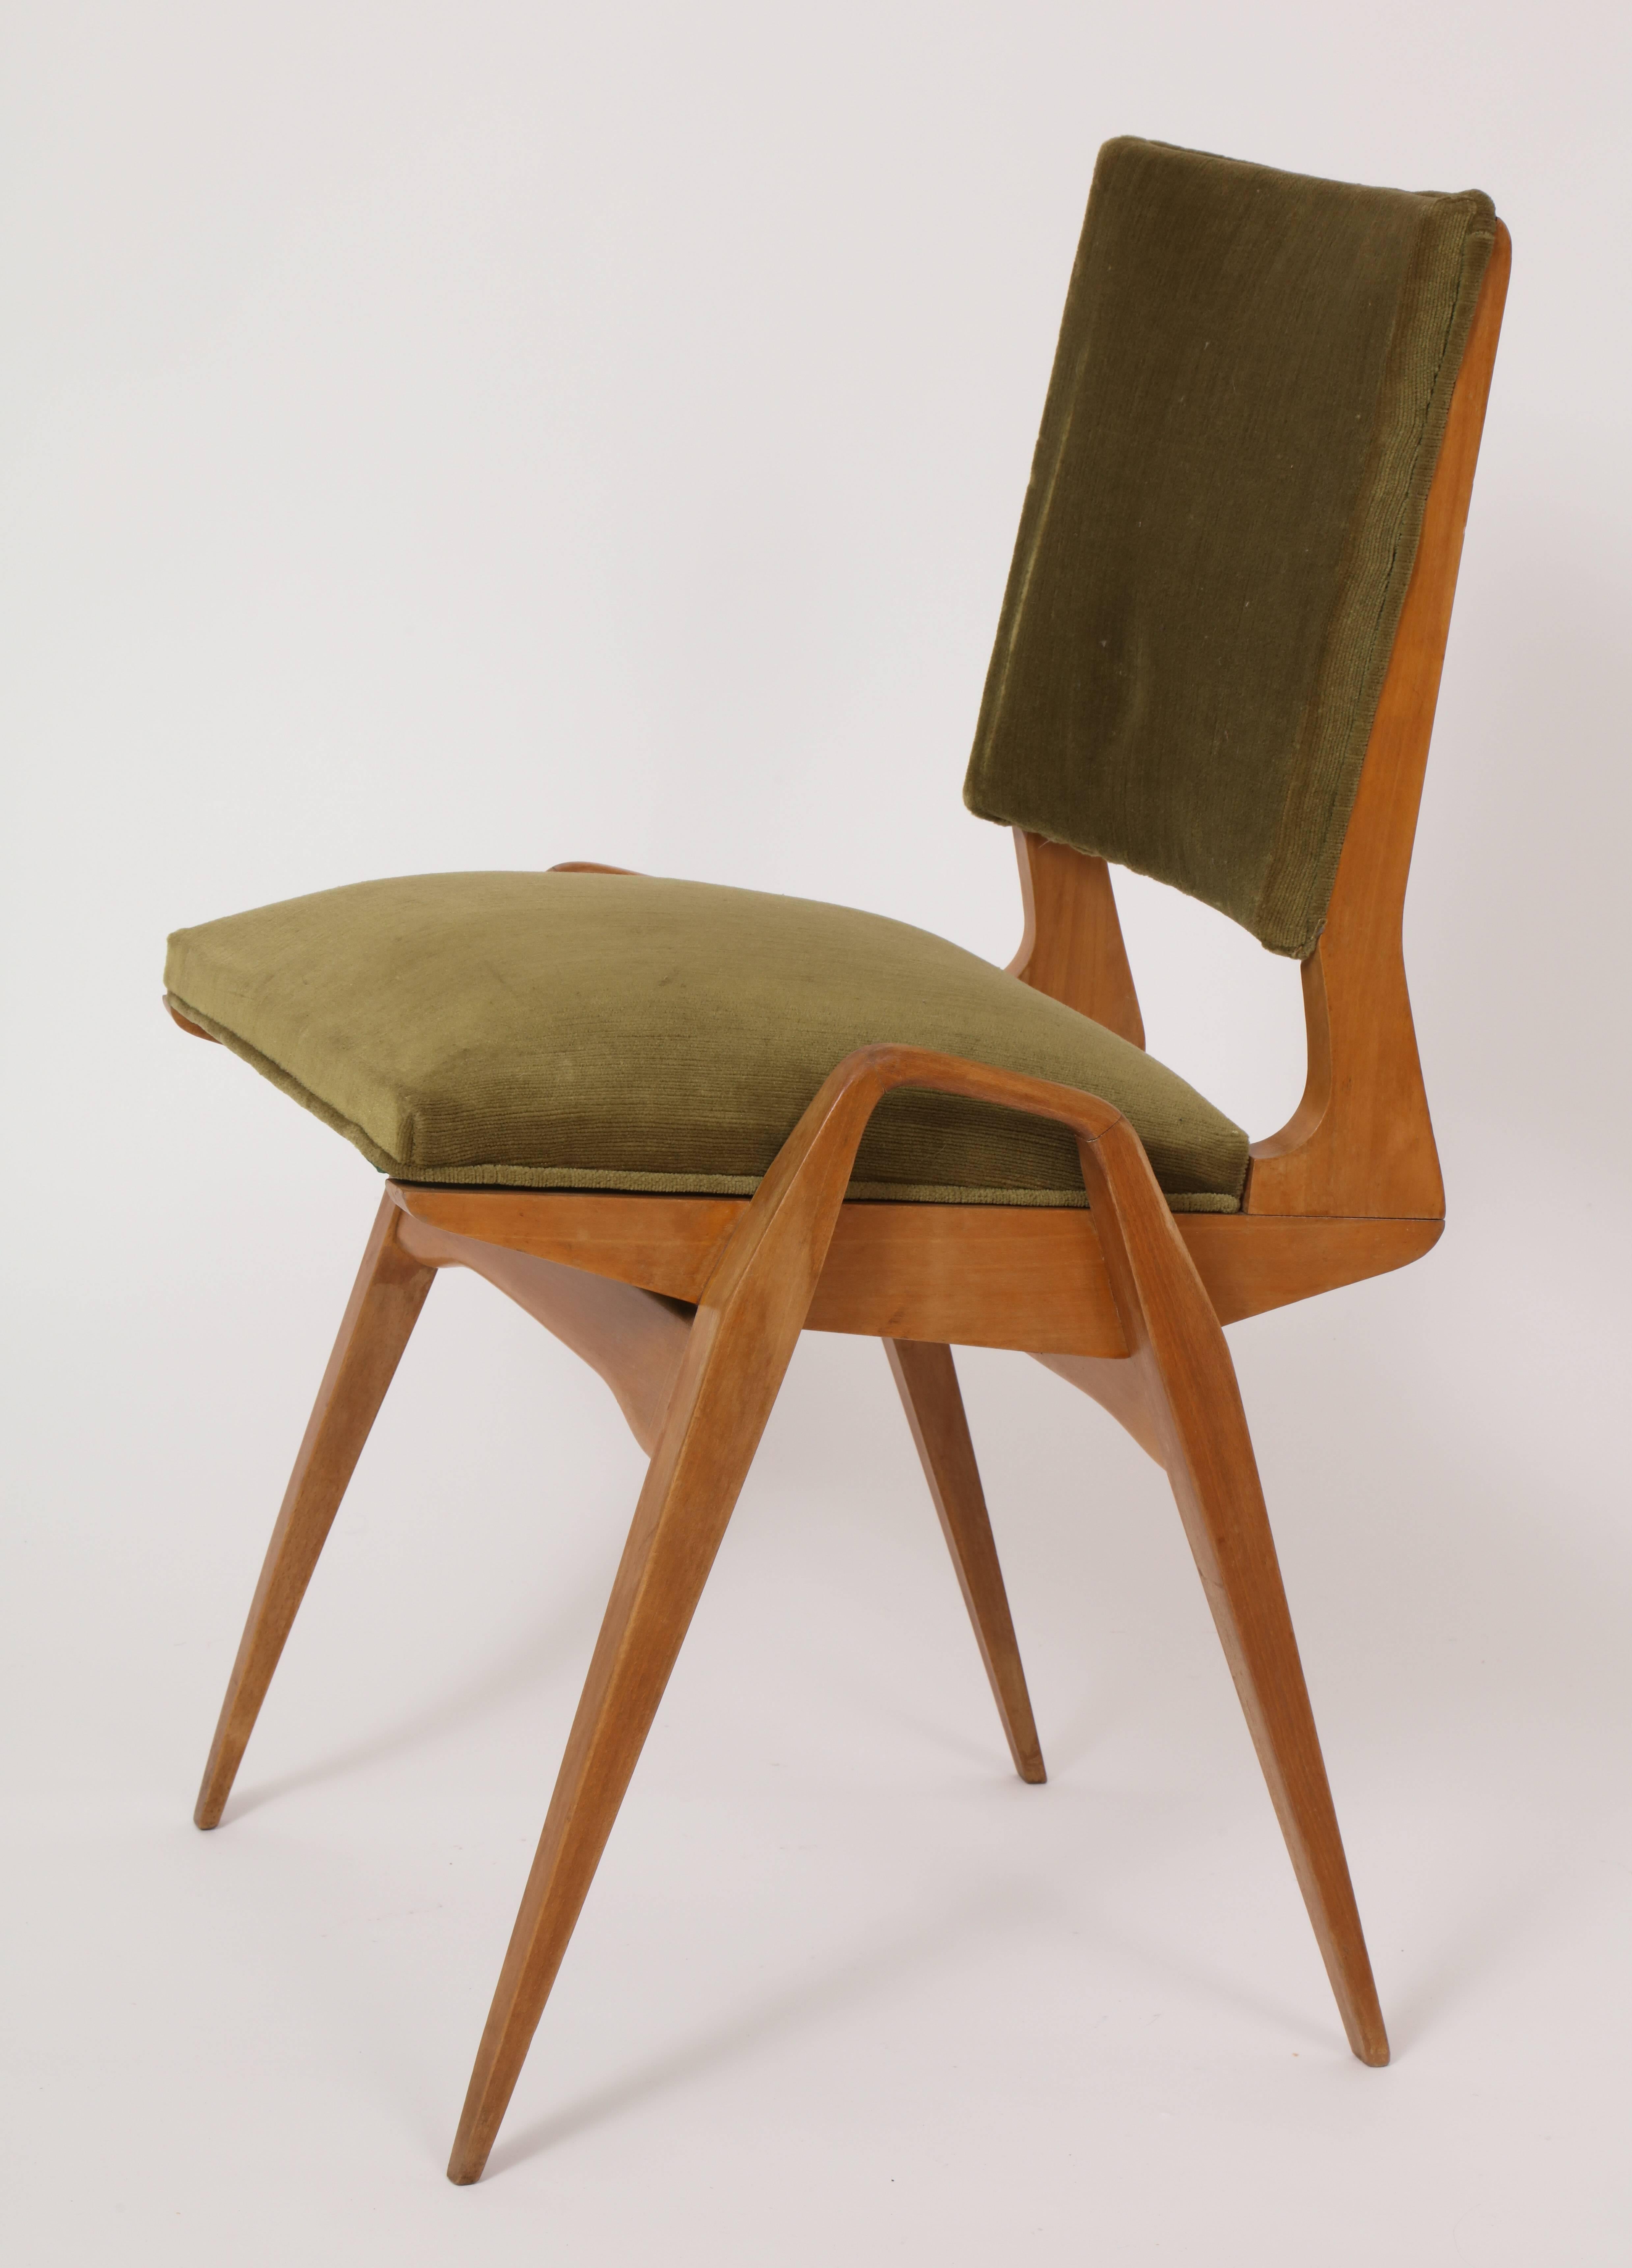 Maurice pre vintage original condition dining chairs.
Beech and velvet.